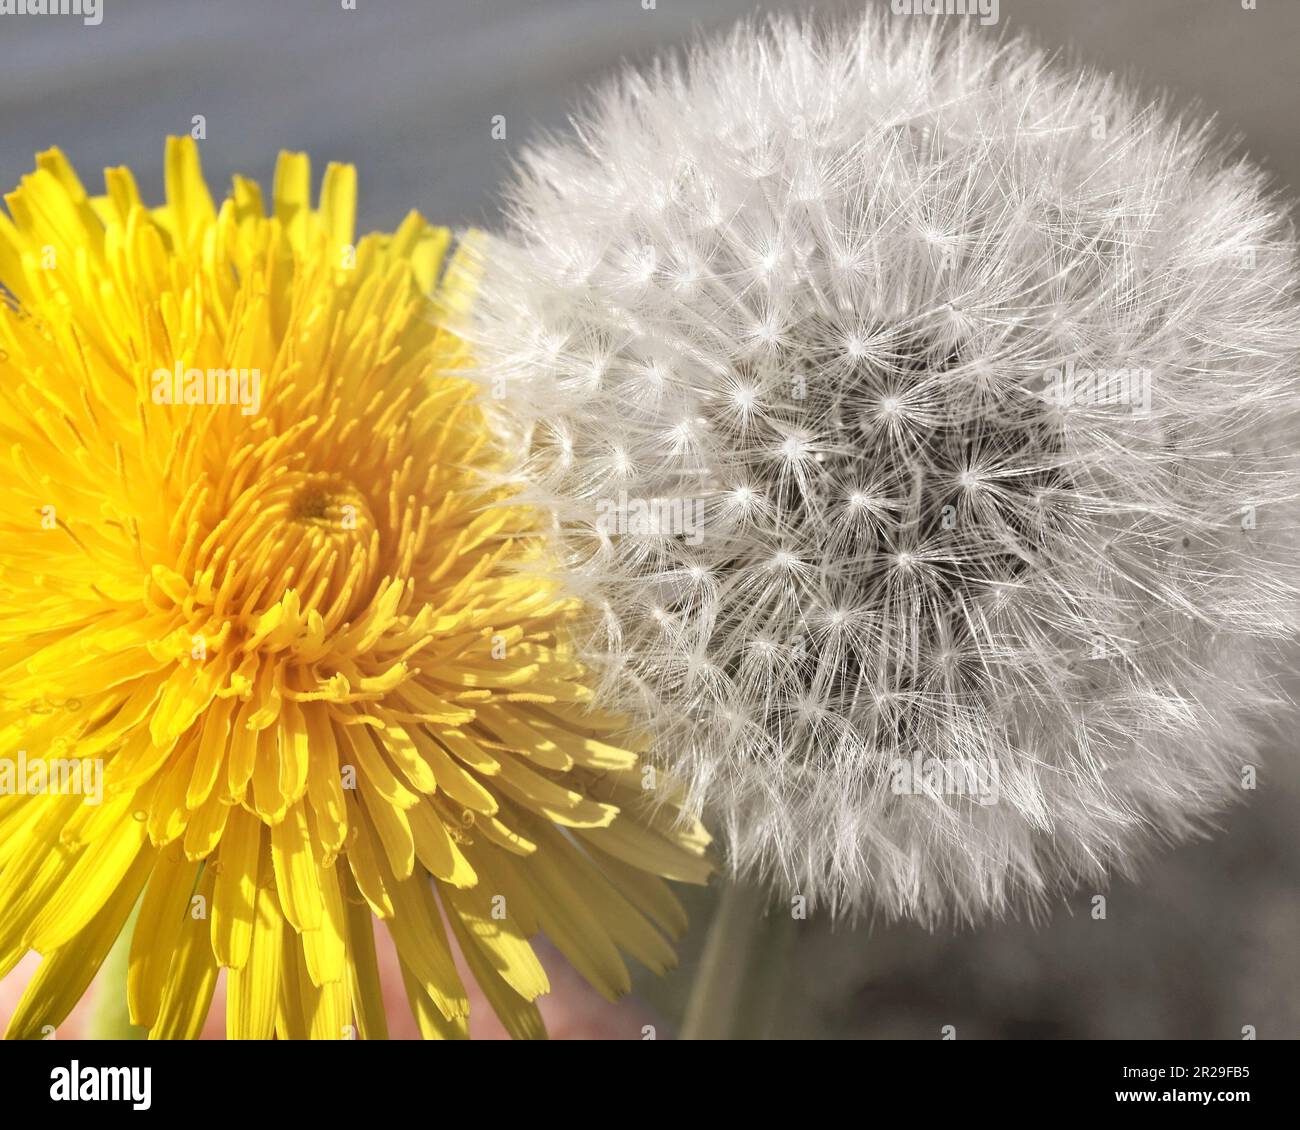 Bright yellow Dandelion flower beside a Dandelion flower that has gone to seed Stock Photo